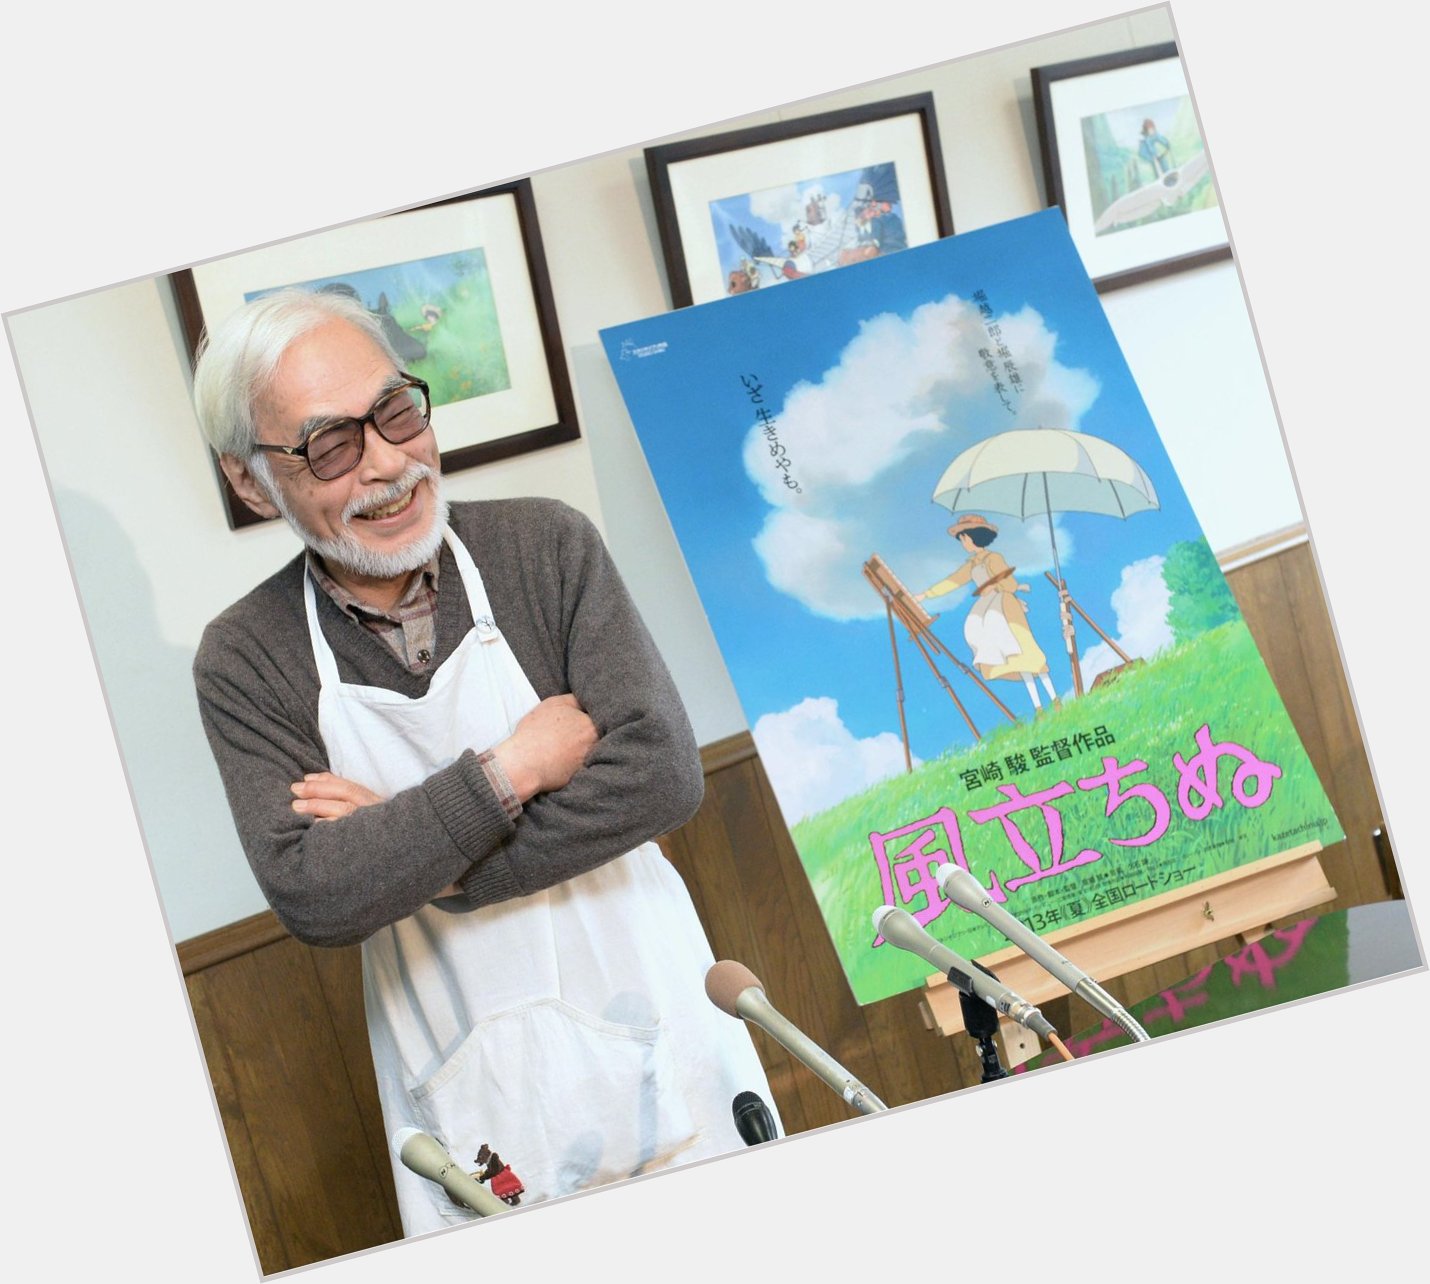 Happy 81st birthday to the greatest director of animation of all time, the genius Hayao Miyazaki 